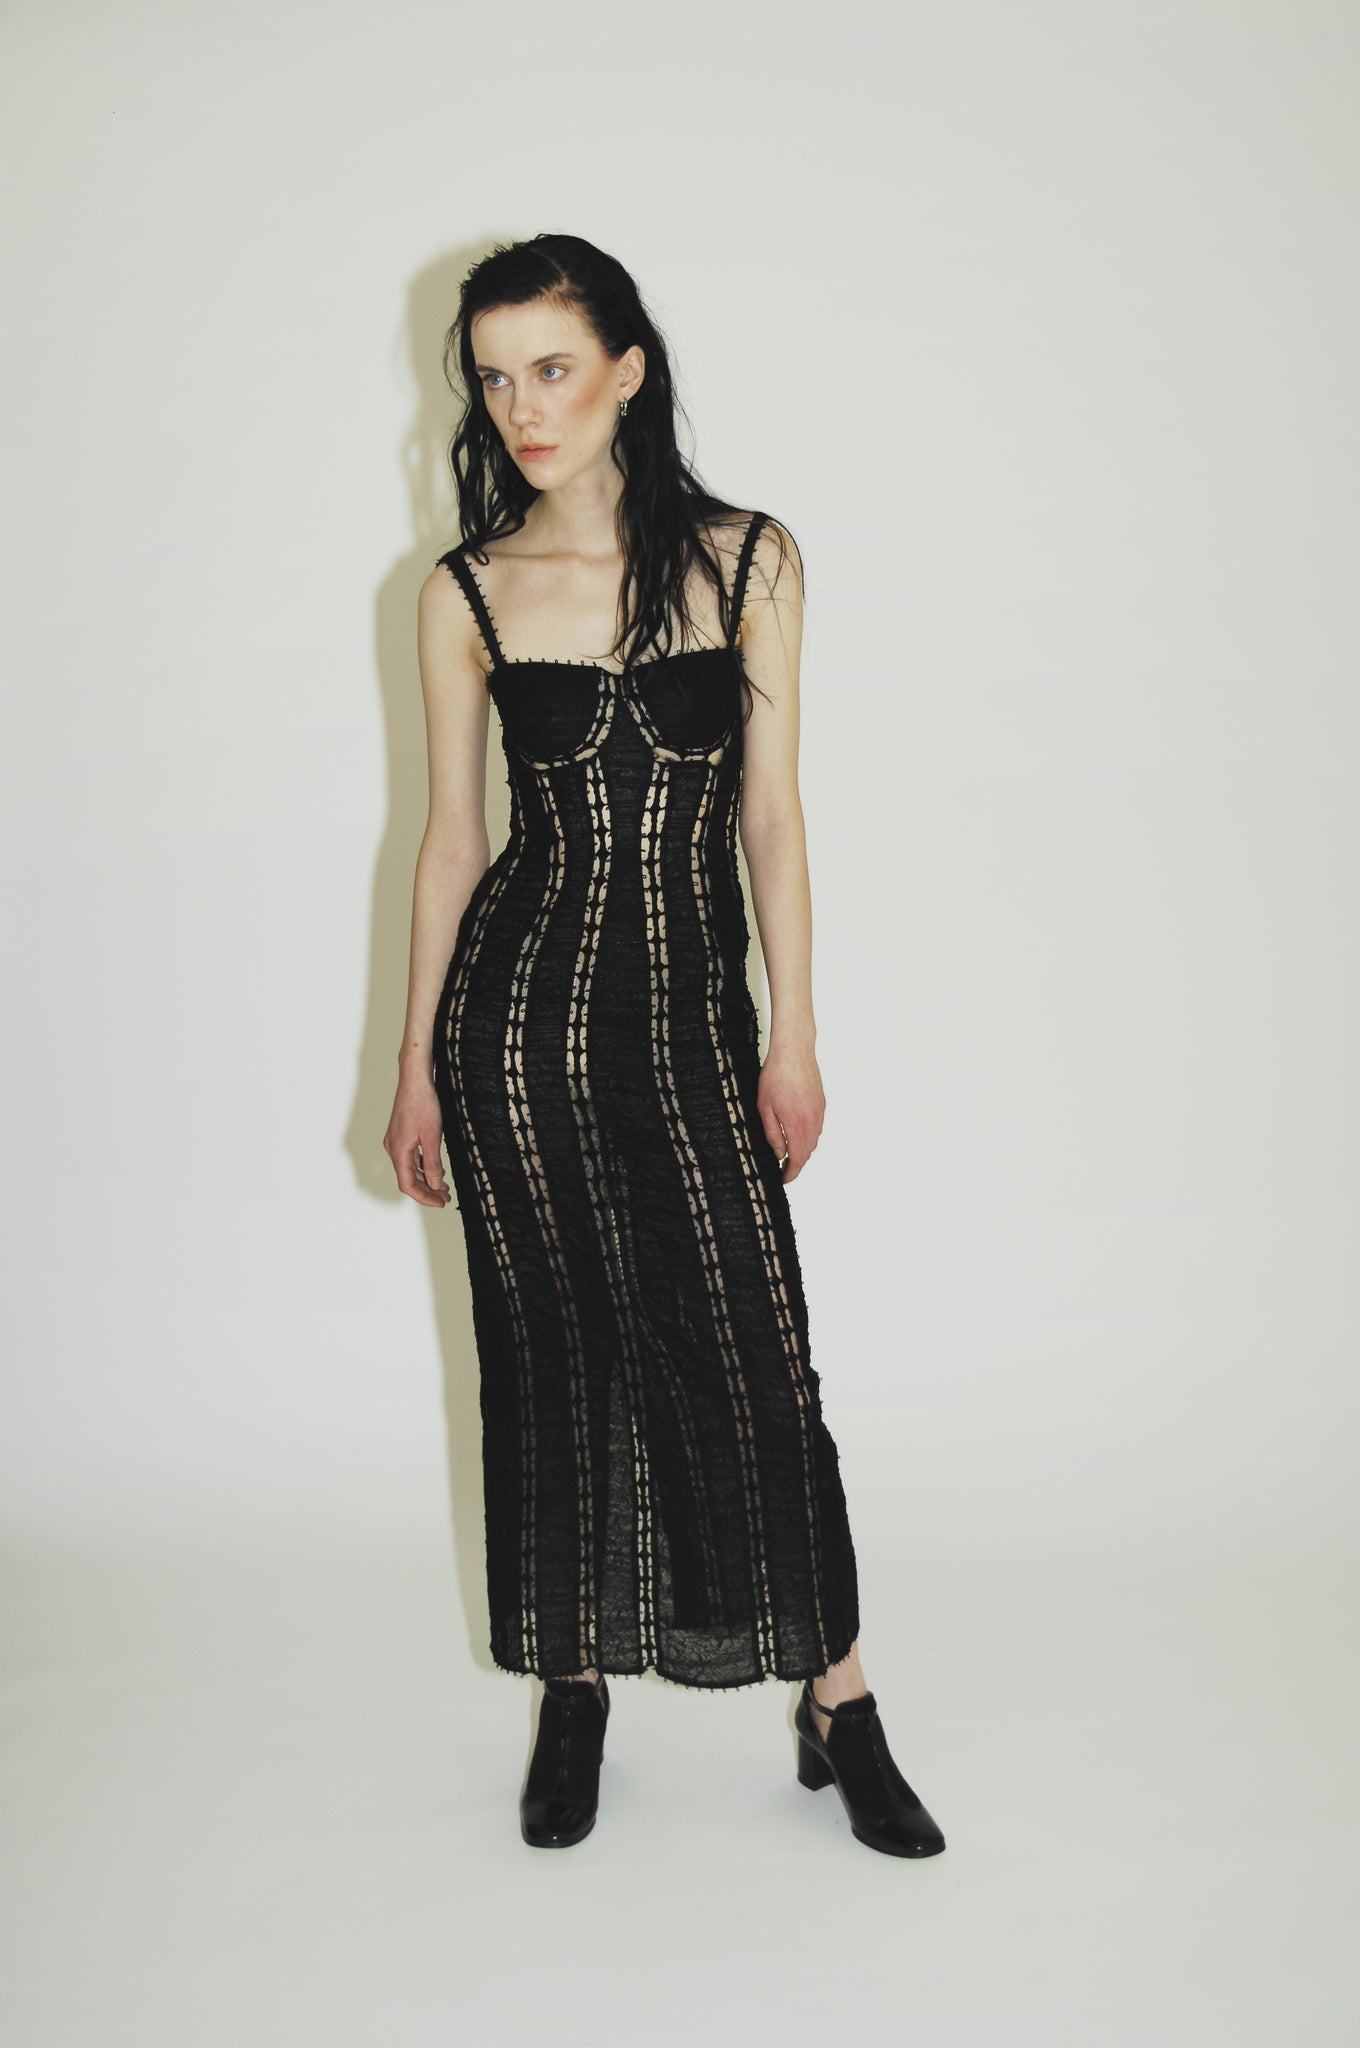 Stylish black cocktail dress for women with off-shoulder design and fashion-forward details.